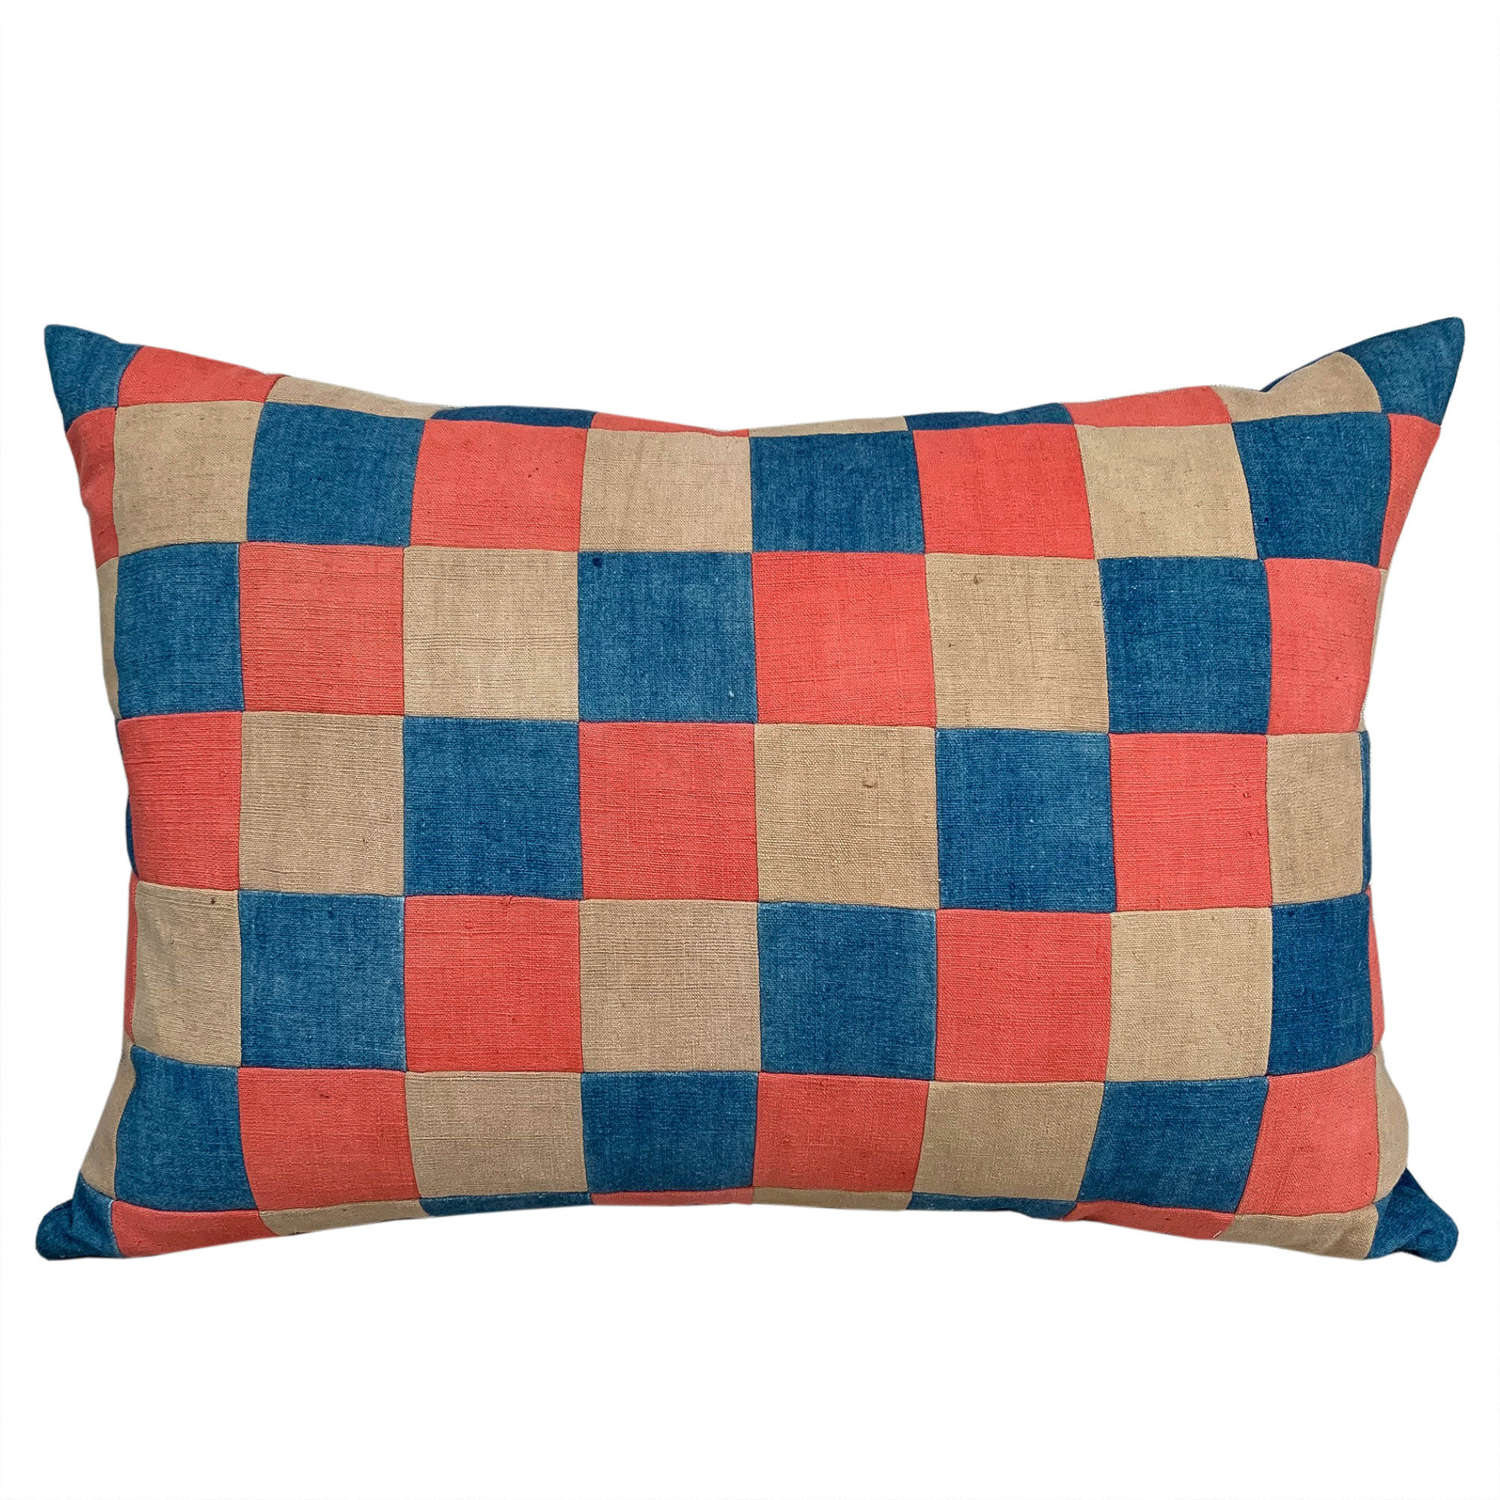 Patchwork cushion in minority textiles